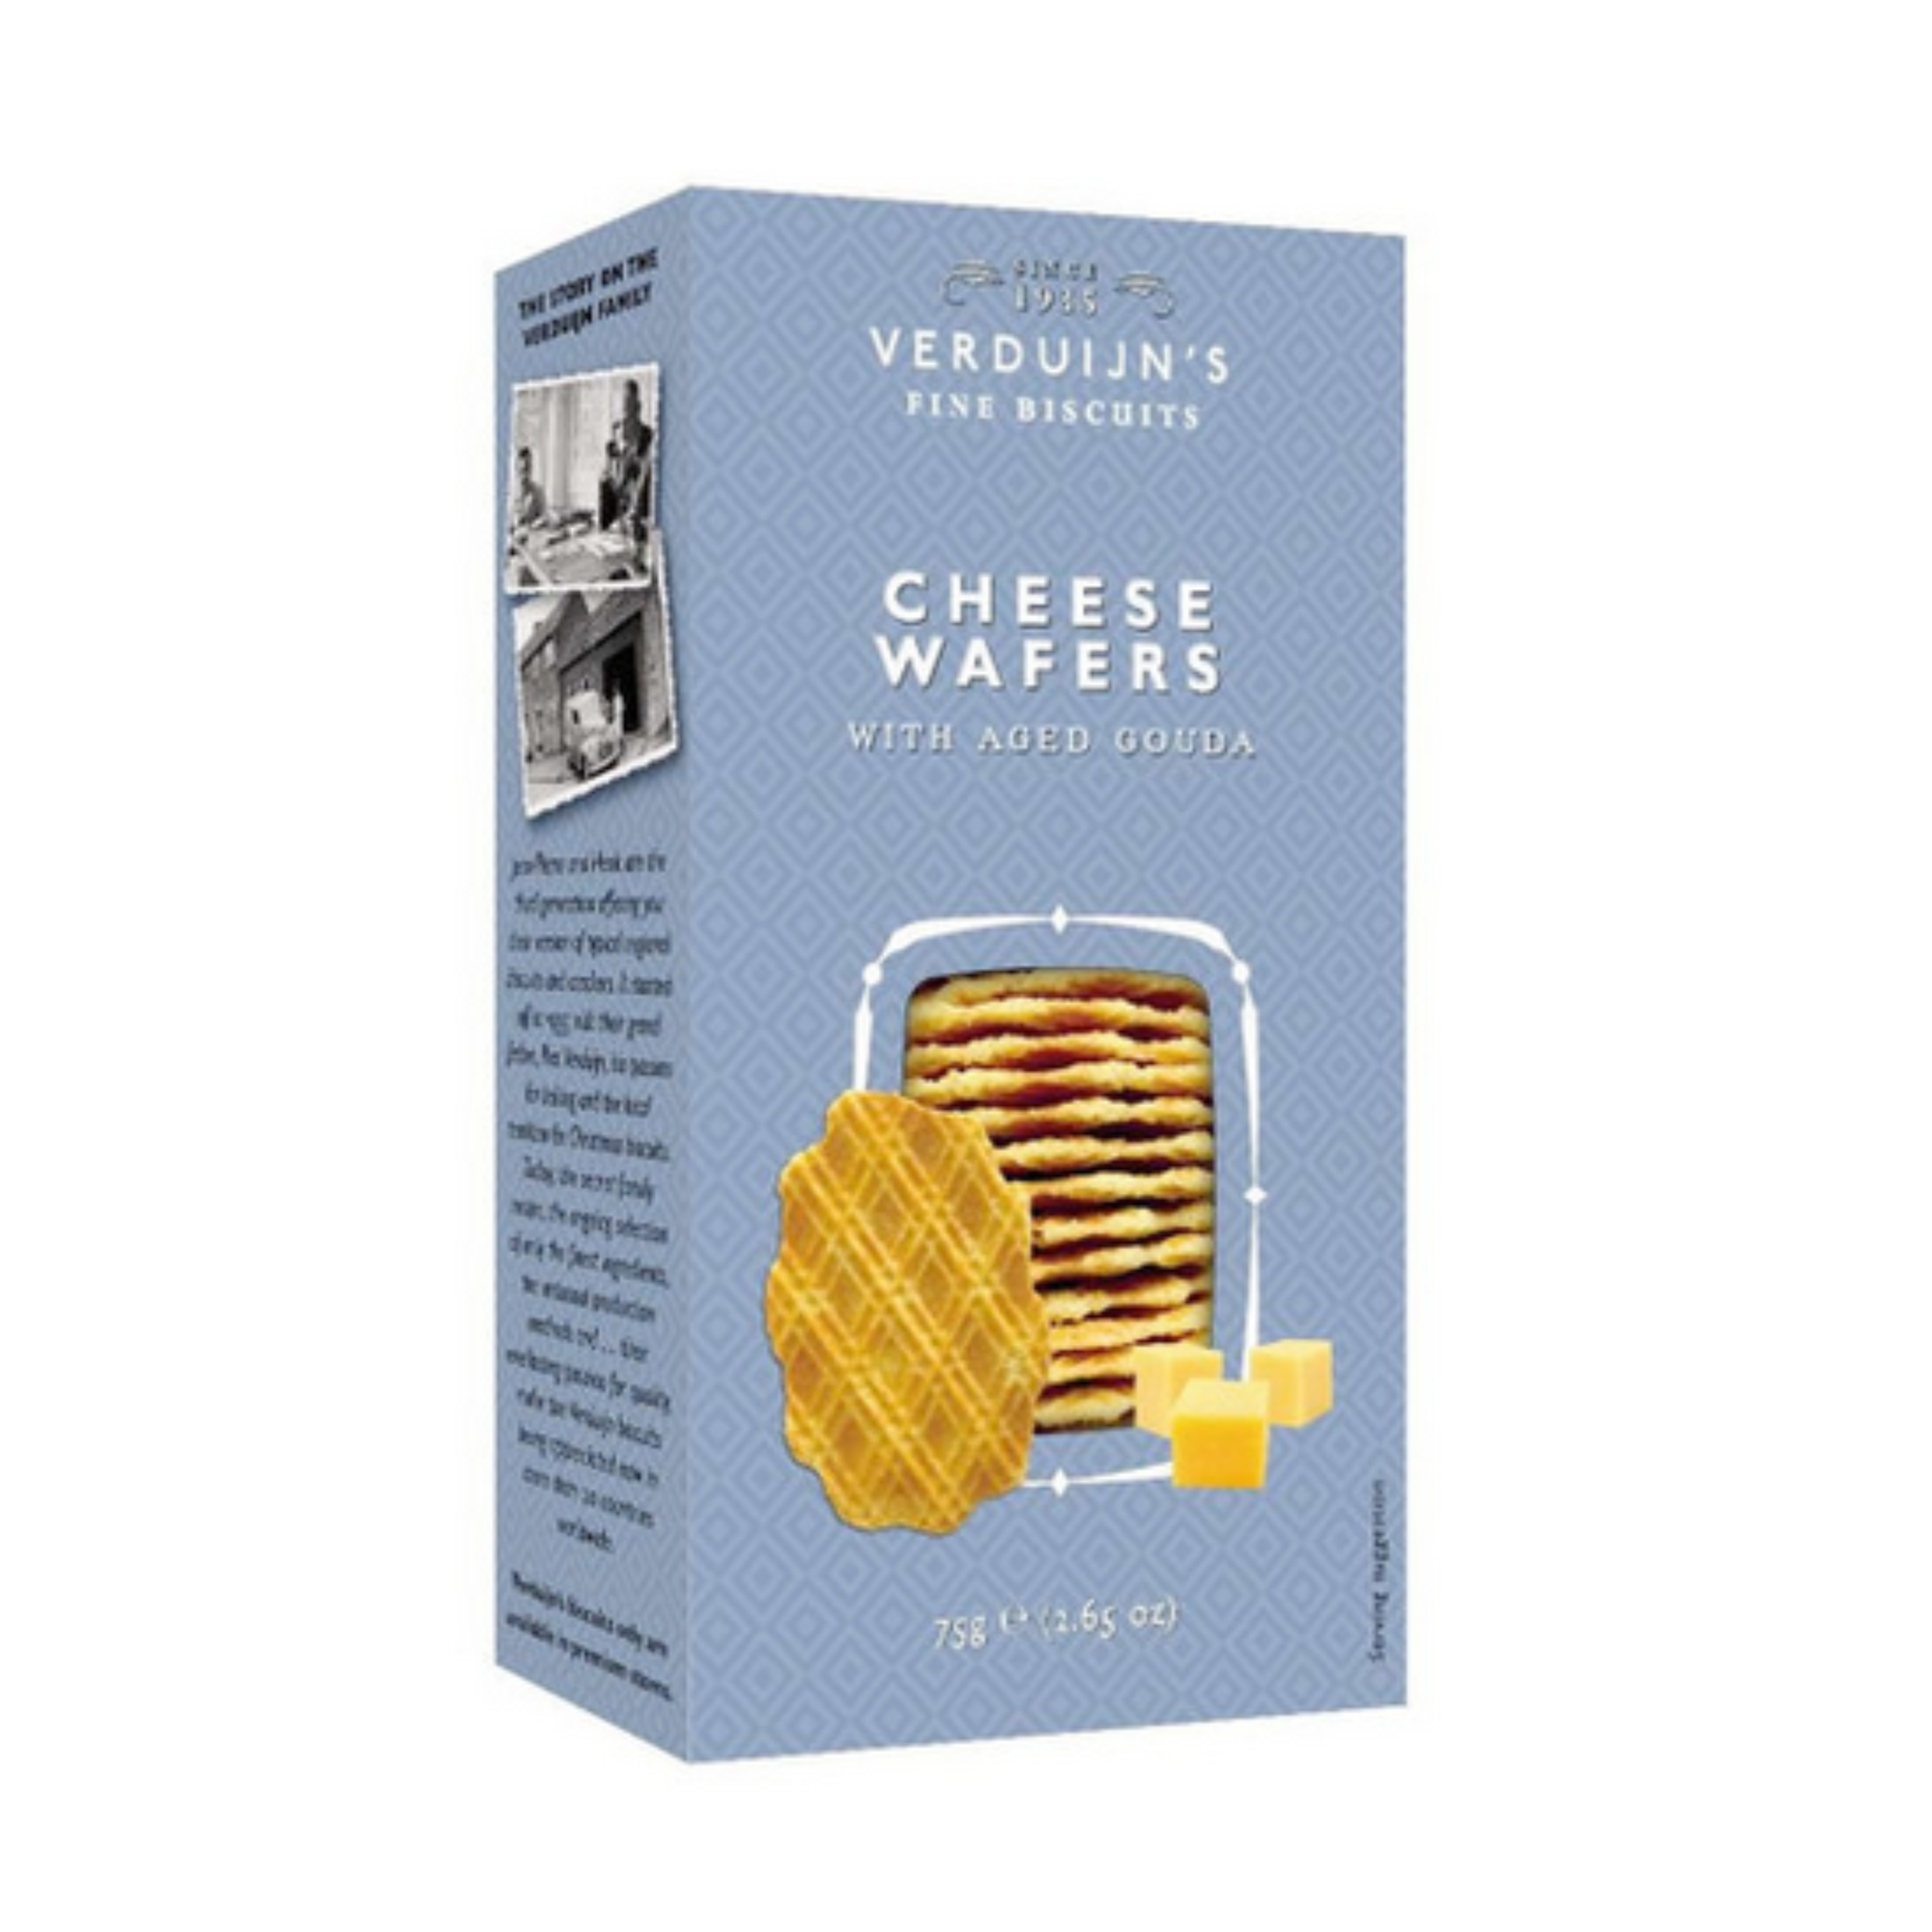 Verduijn's Cheese Wafers with Aged Gouda